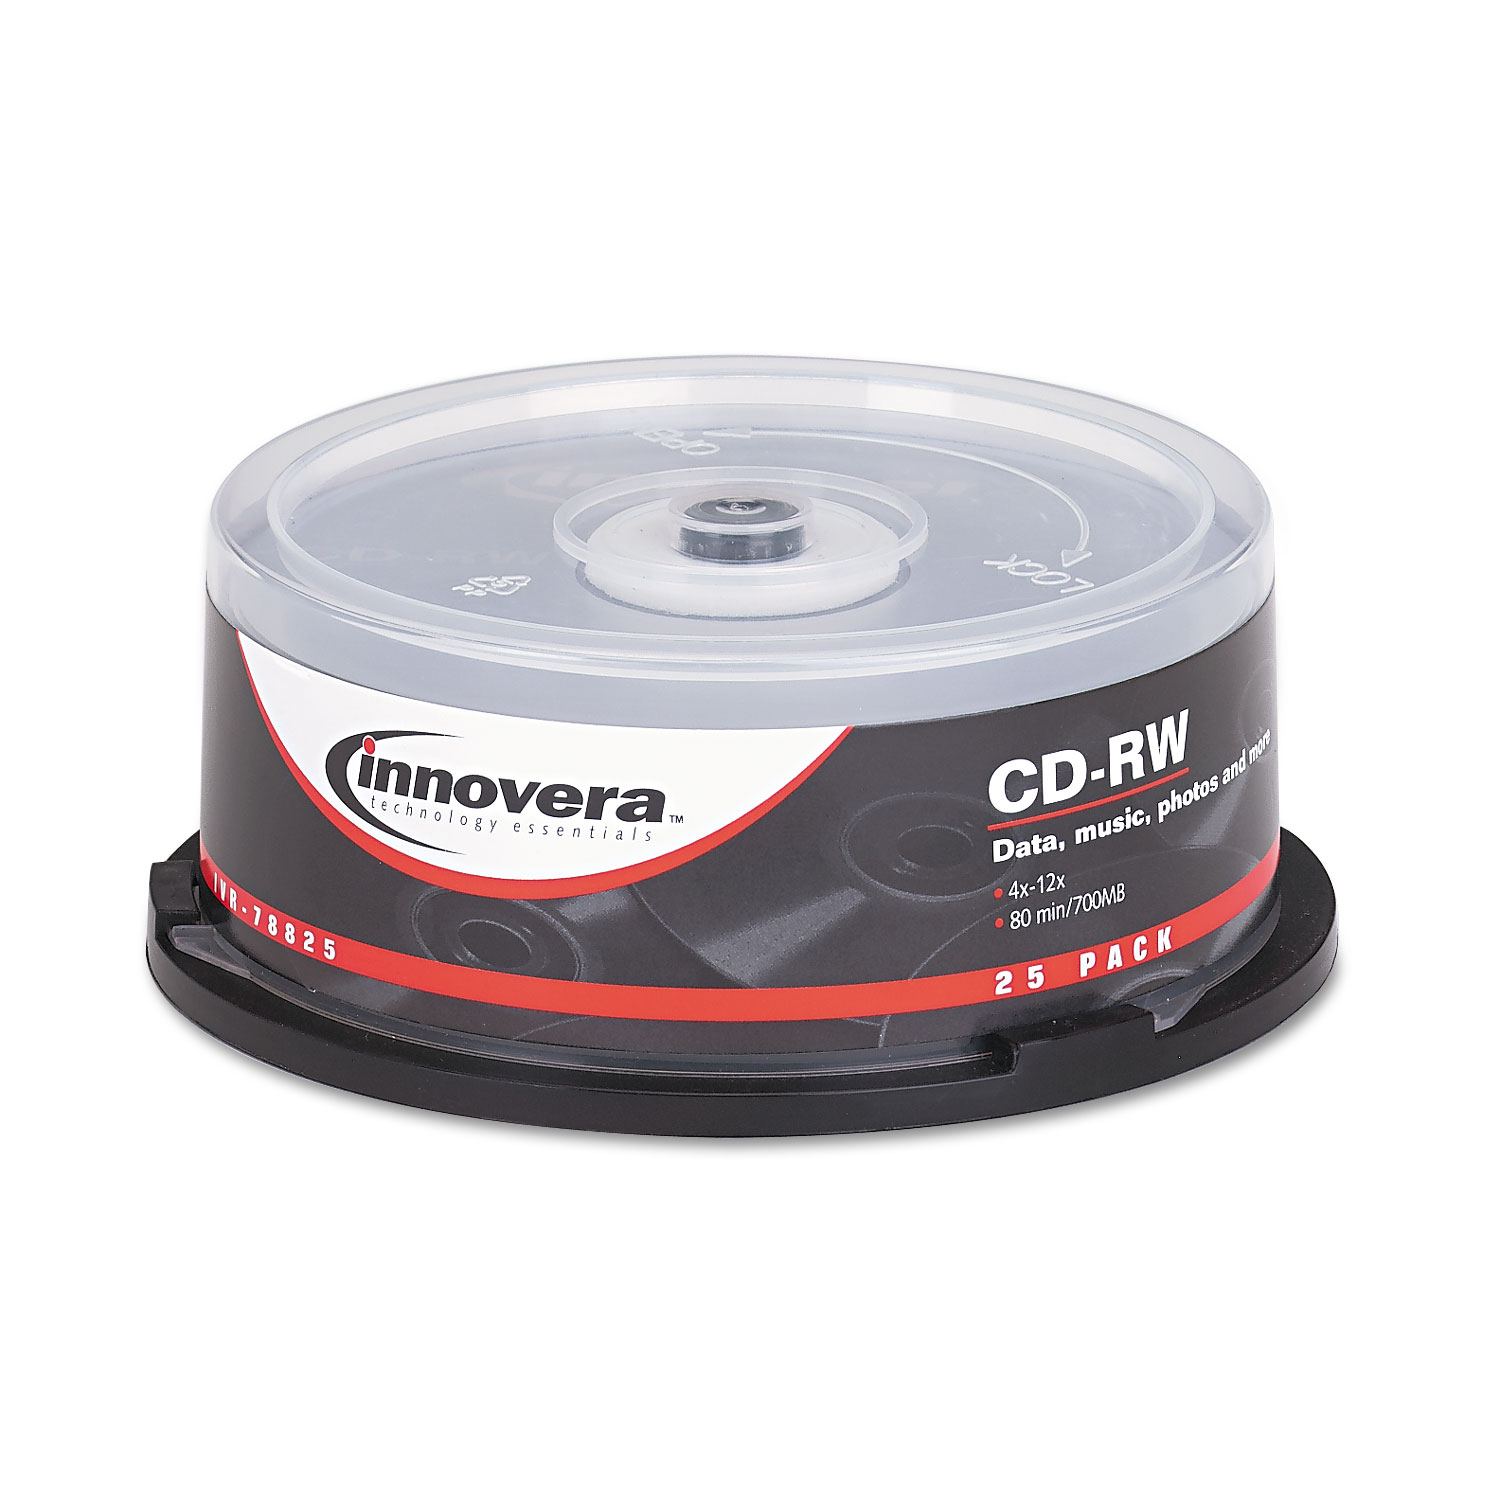 CD-RW Discs, 700MB/80min, 12x, Spindle, Silver, 25/Pack